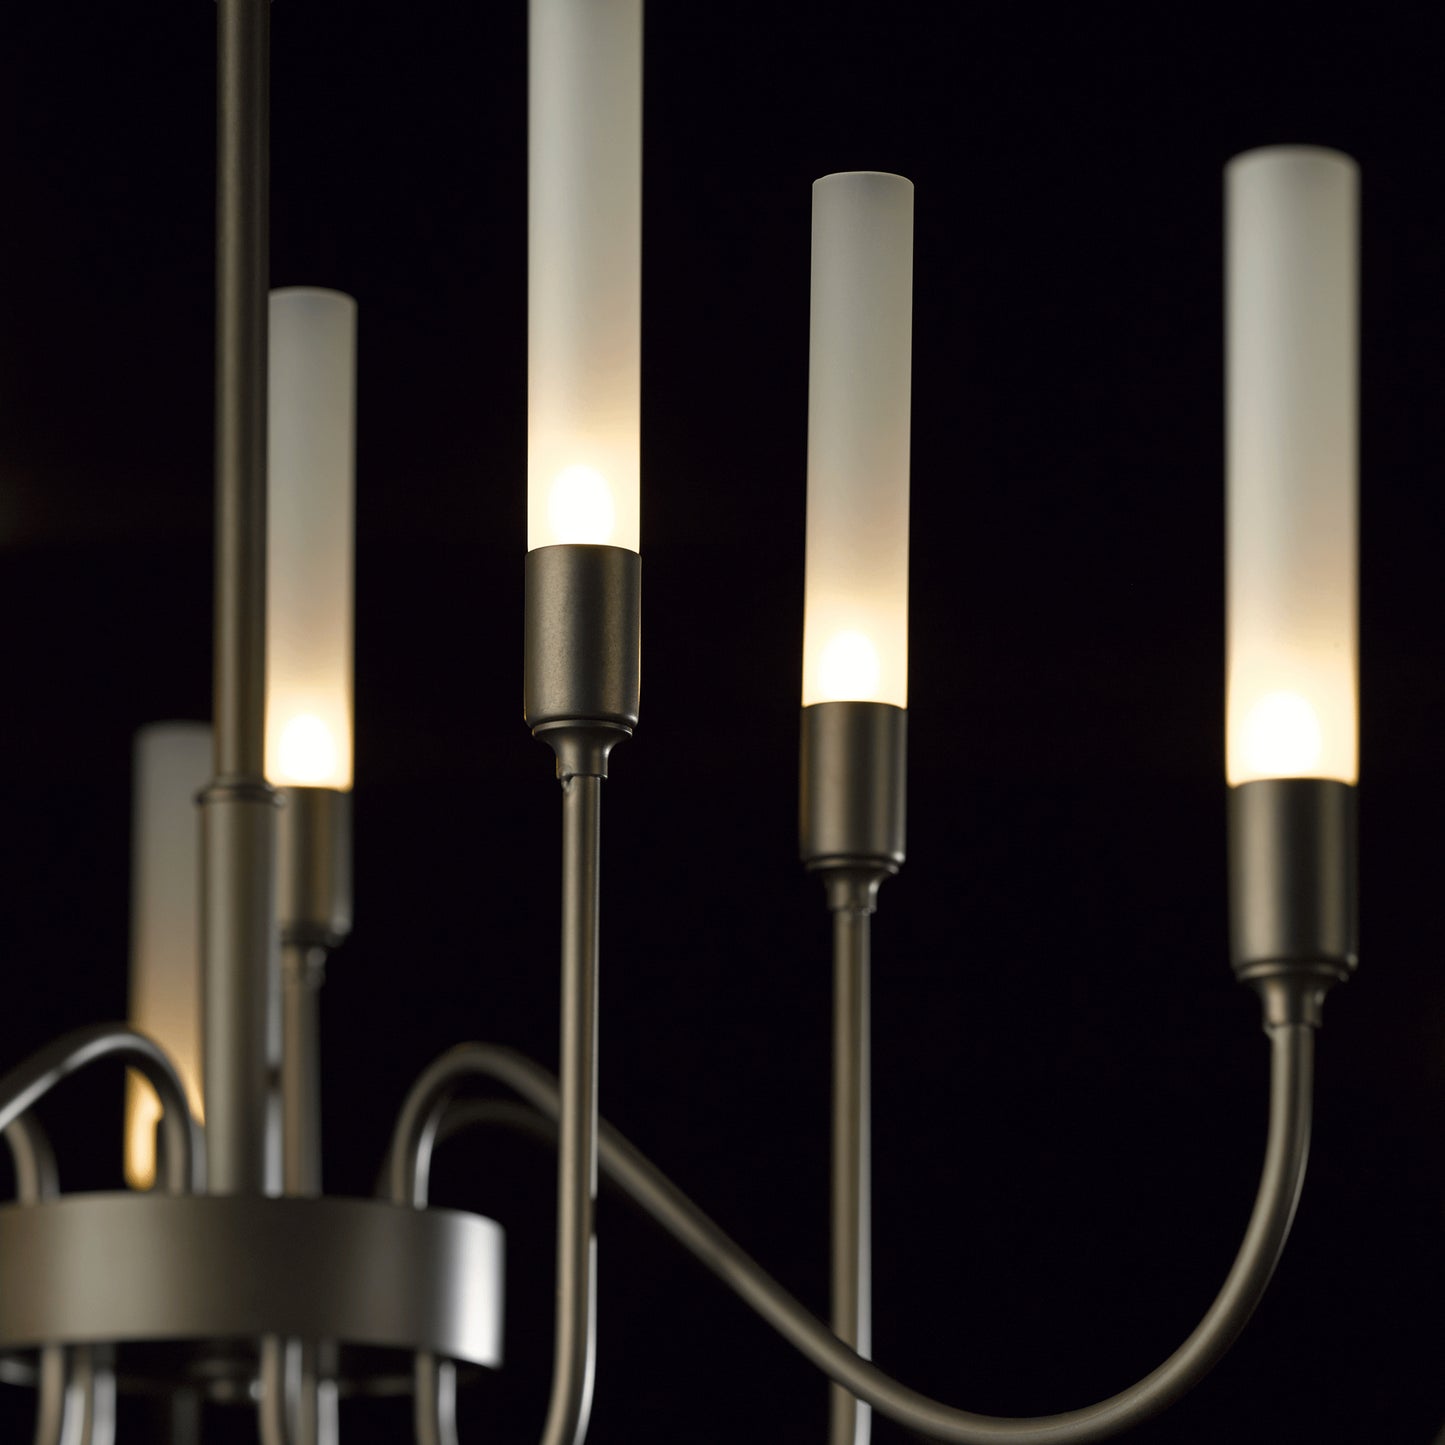 The Lisse 10-Arm Chandelier by Hubbardton Forge, handcrafted in Vermont, illuminates any space with its several lights and sleek design against a black background.